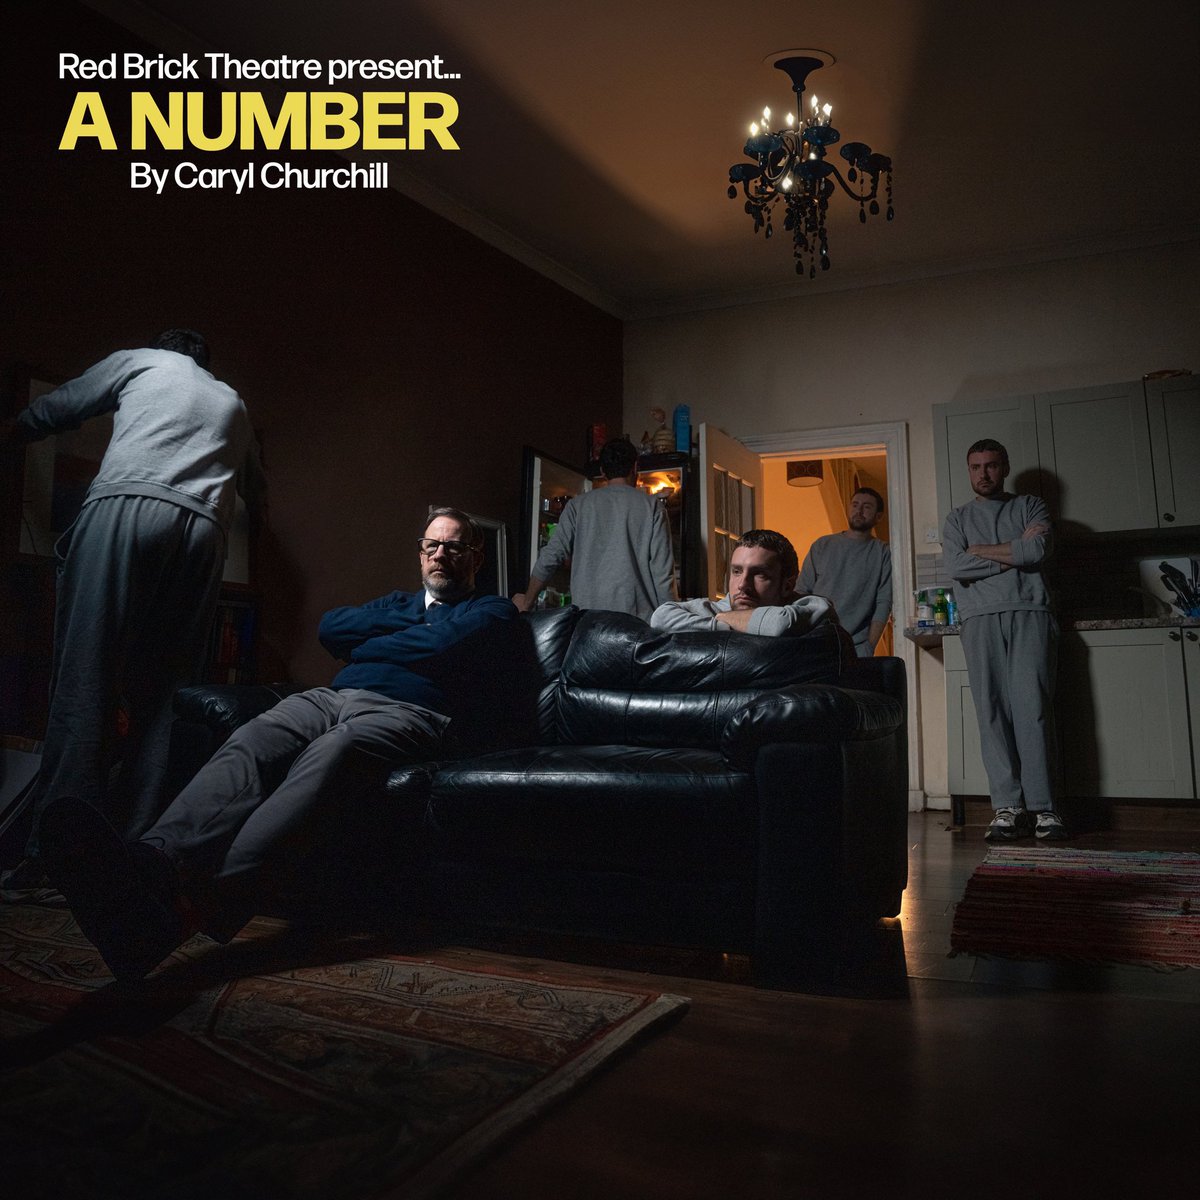 Our good friends at @redbrick_t open with Caryl Churchill’s A NUMBER next week! We can’t wait to see this one. Hurry and get your tickets quick! 📅 22nd - 24th May 📍 @53two 🎟️ £2/£11 👉 bit.ly/3UIWT2t